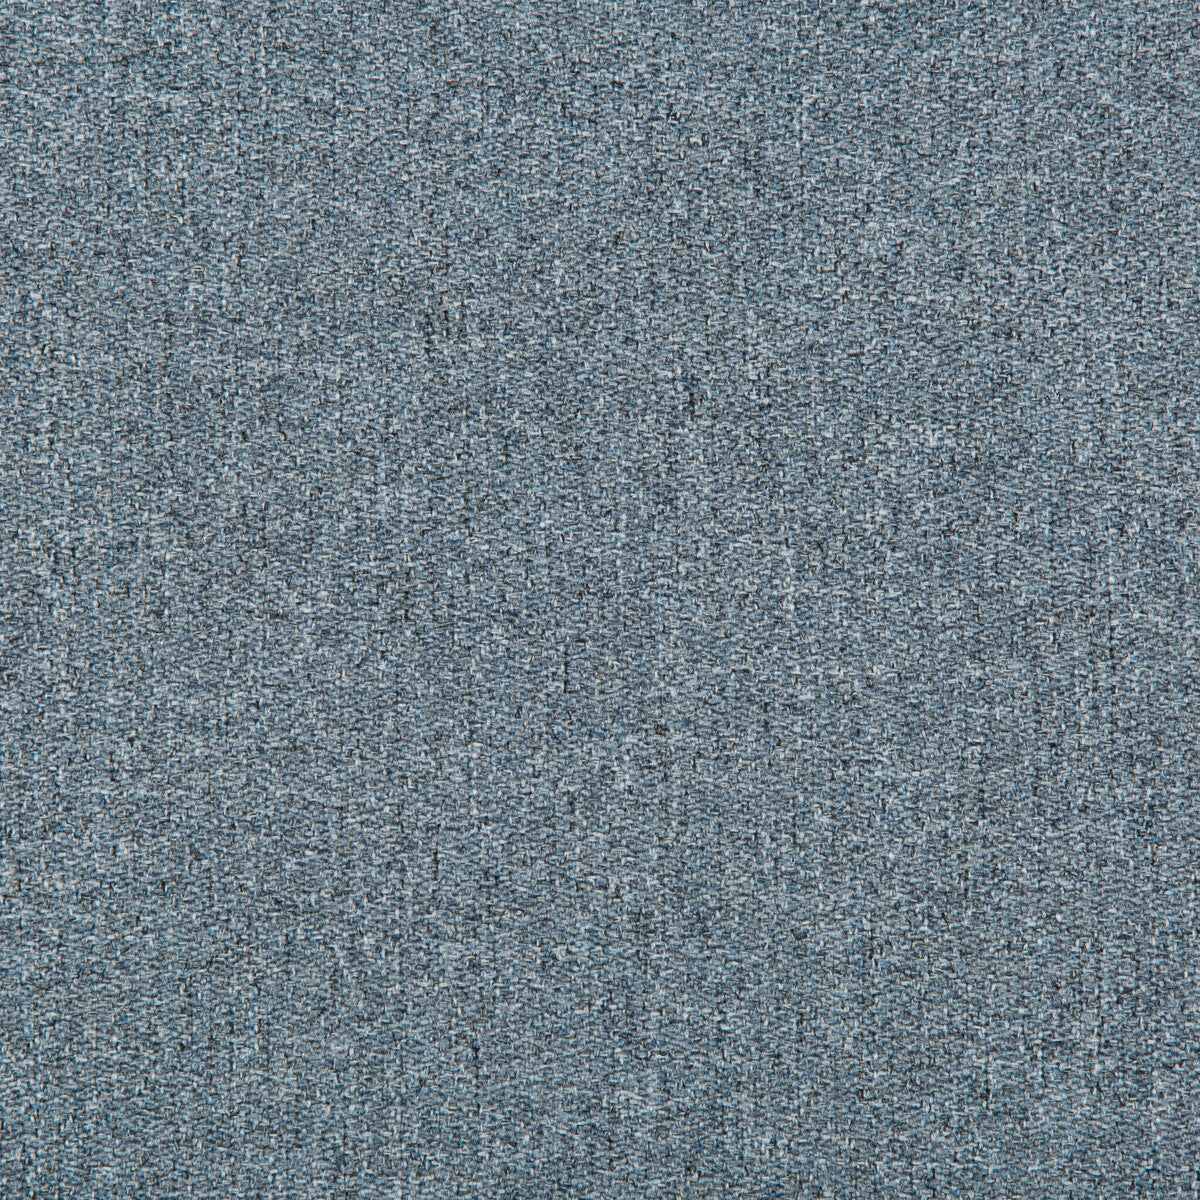 Tweedford fabric in chambray color - pattern 35346.5.0 - by Kravet Basics